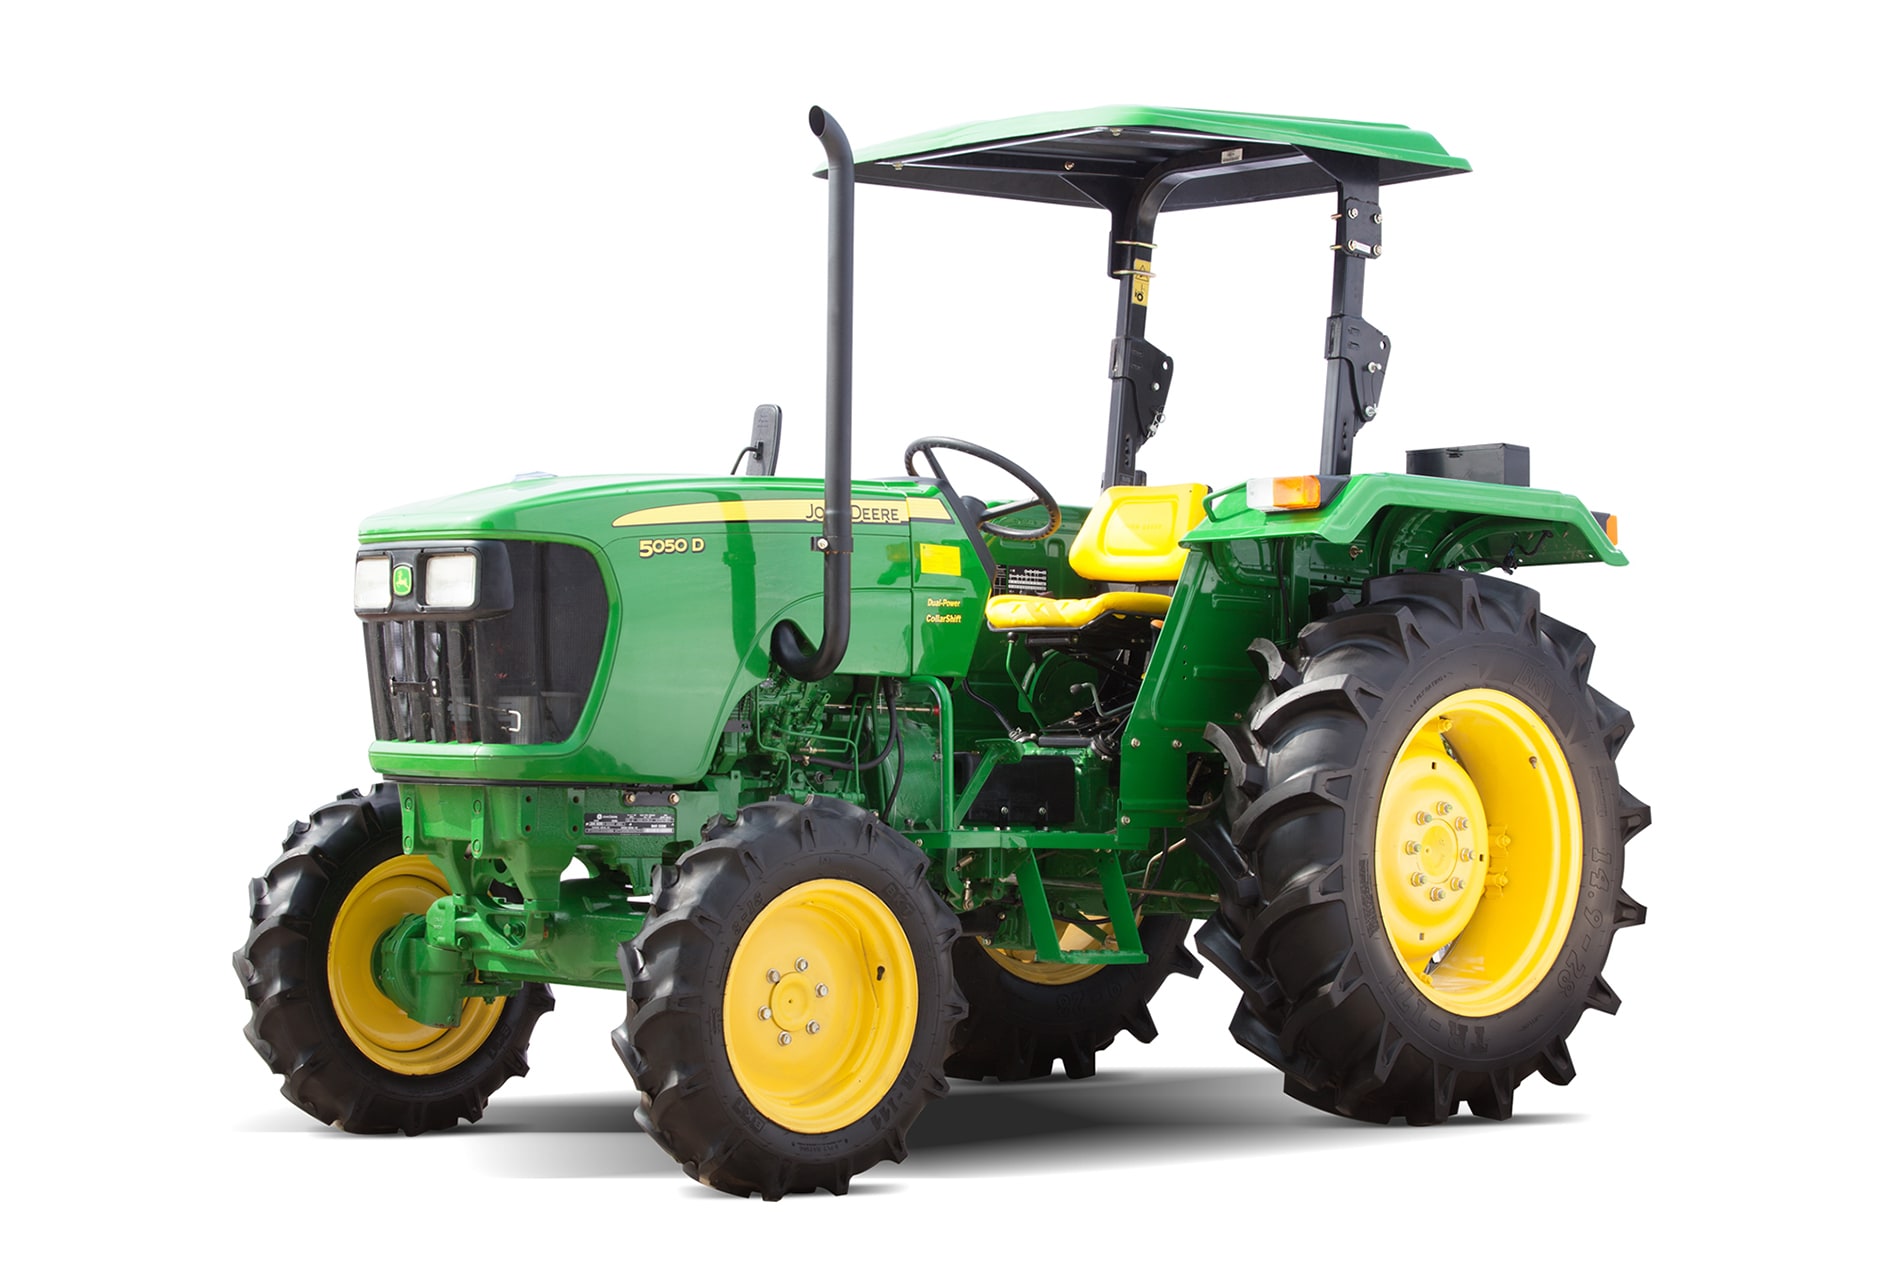 5D Series Tractor Image